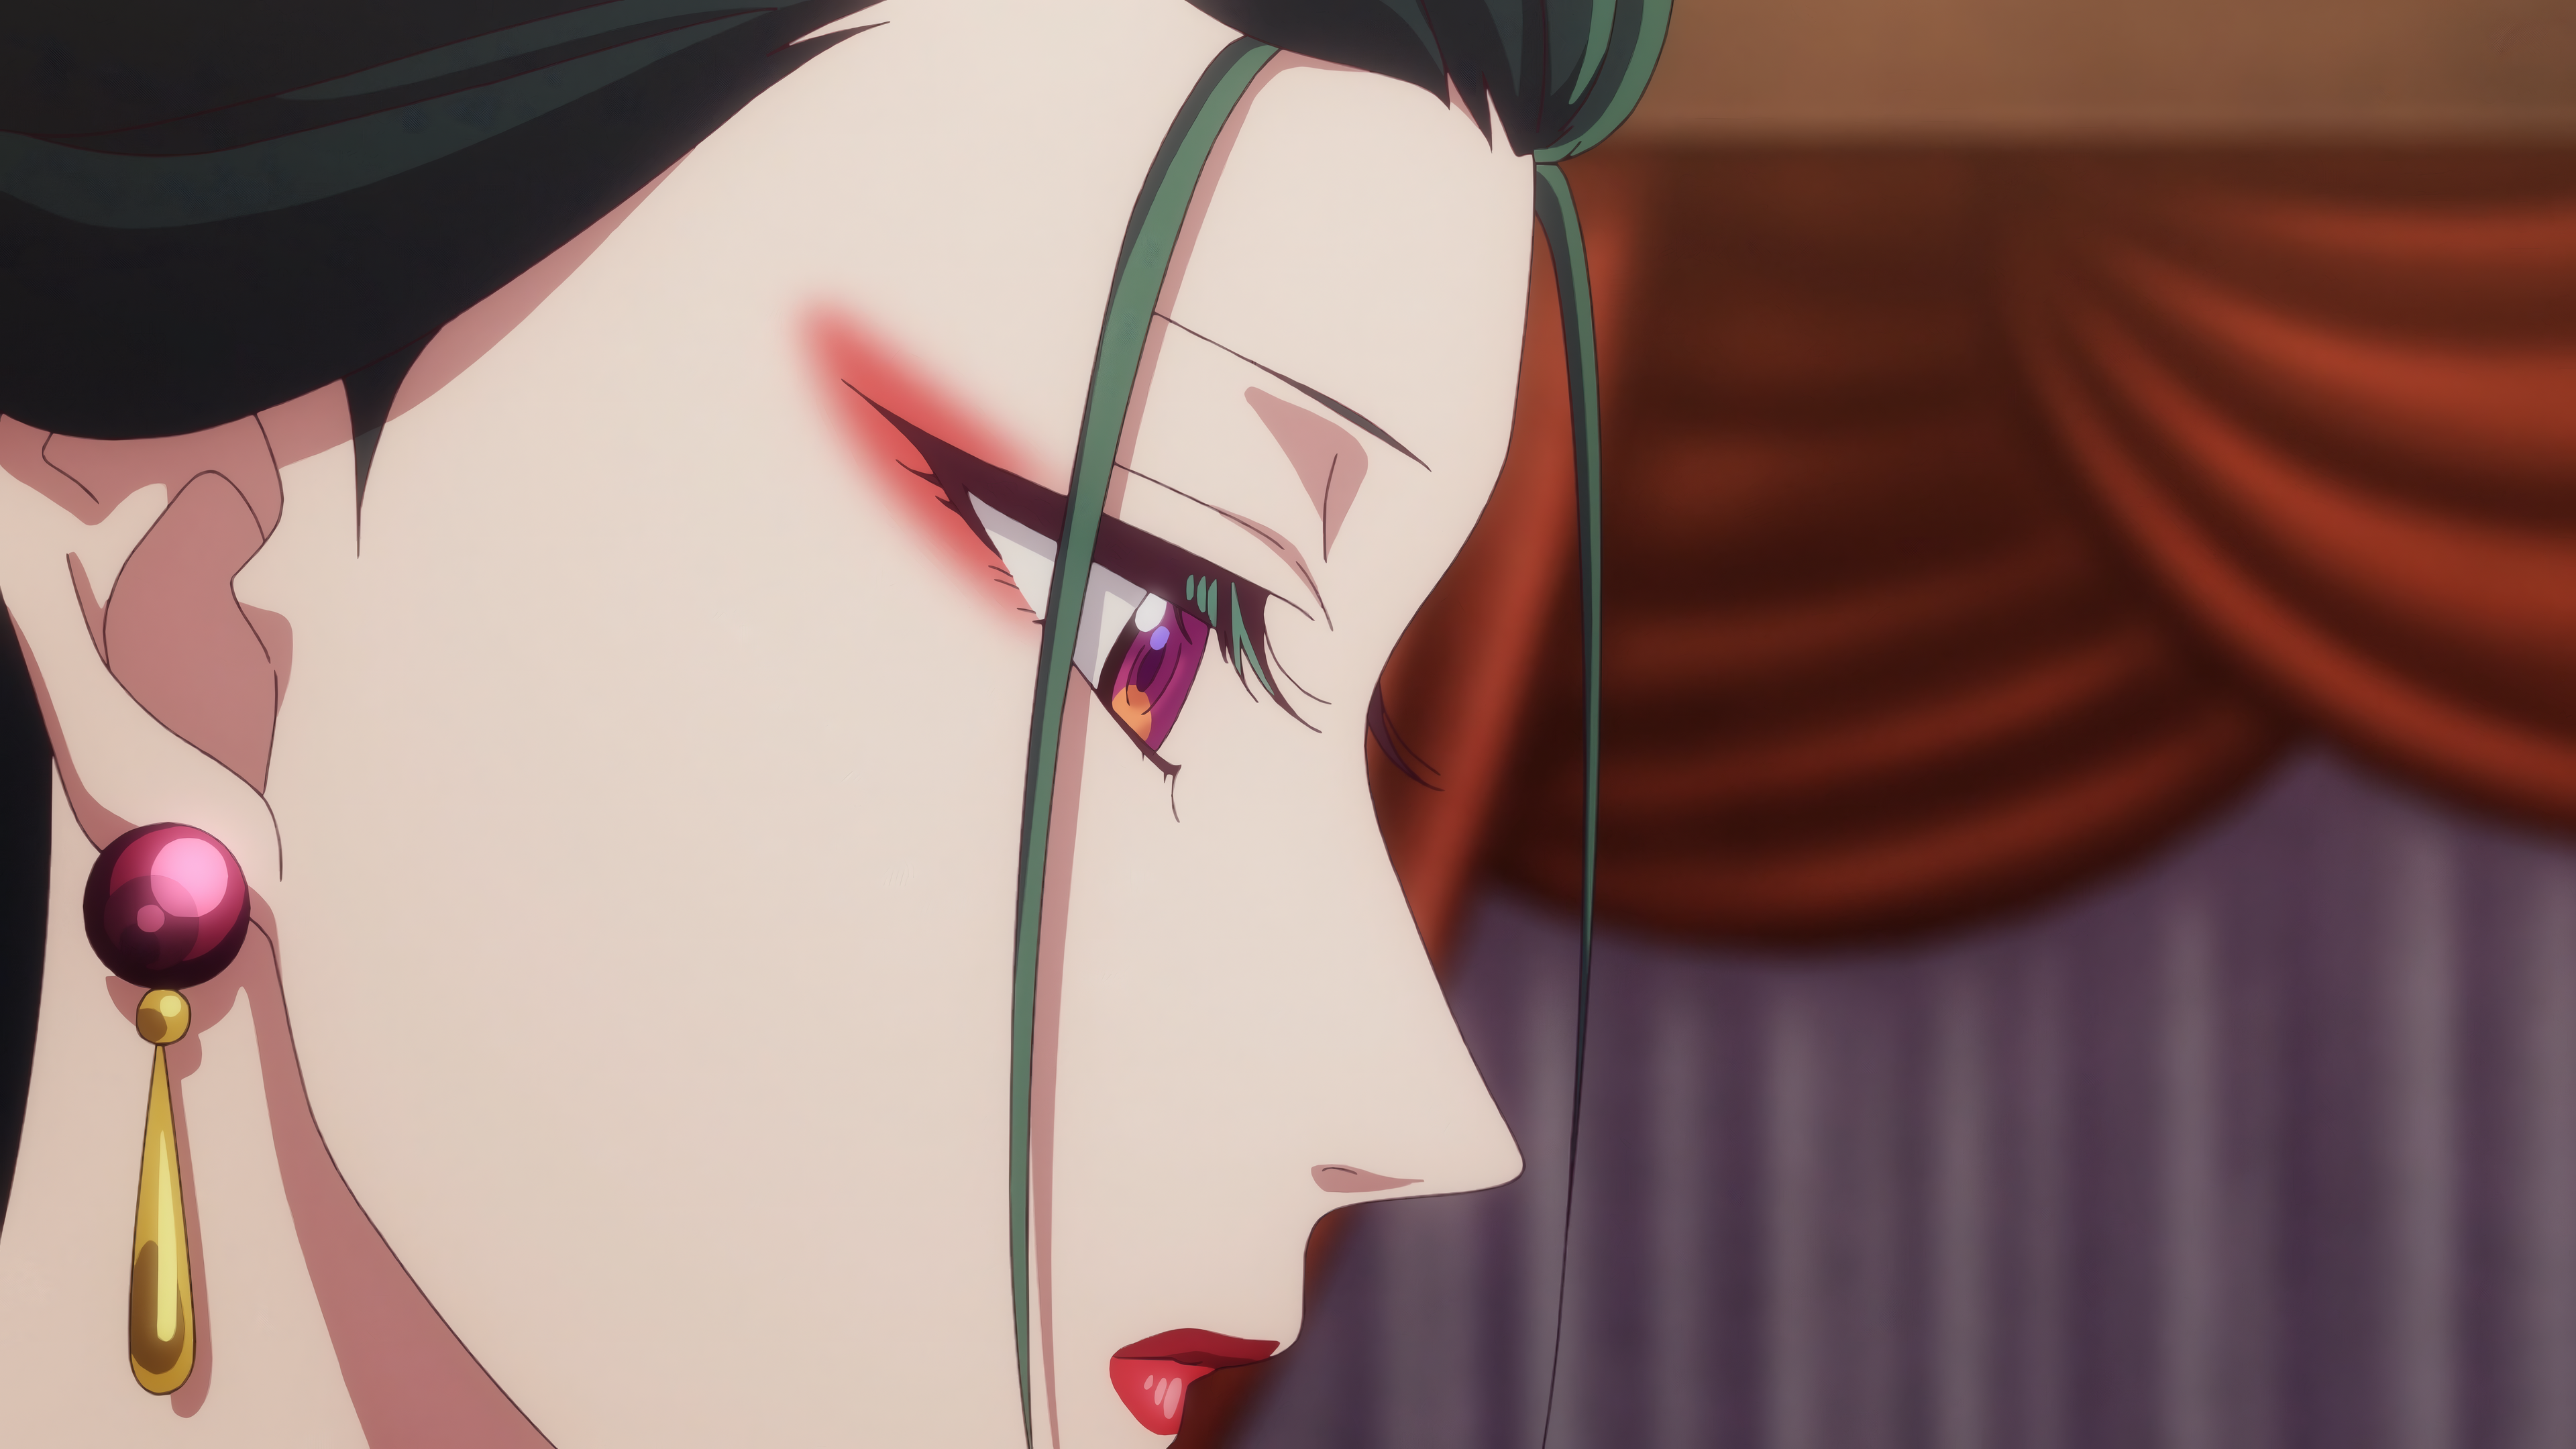 Anime 3840x2160 The Apothecary Diaries Fengxian (The Apothecary Diaries) closeup anime girls anime anime screenshot side view red lipstick lipstick closed mouth makeup earring face blurry background